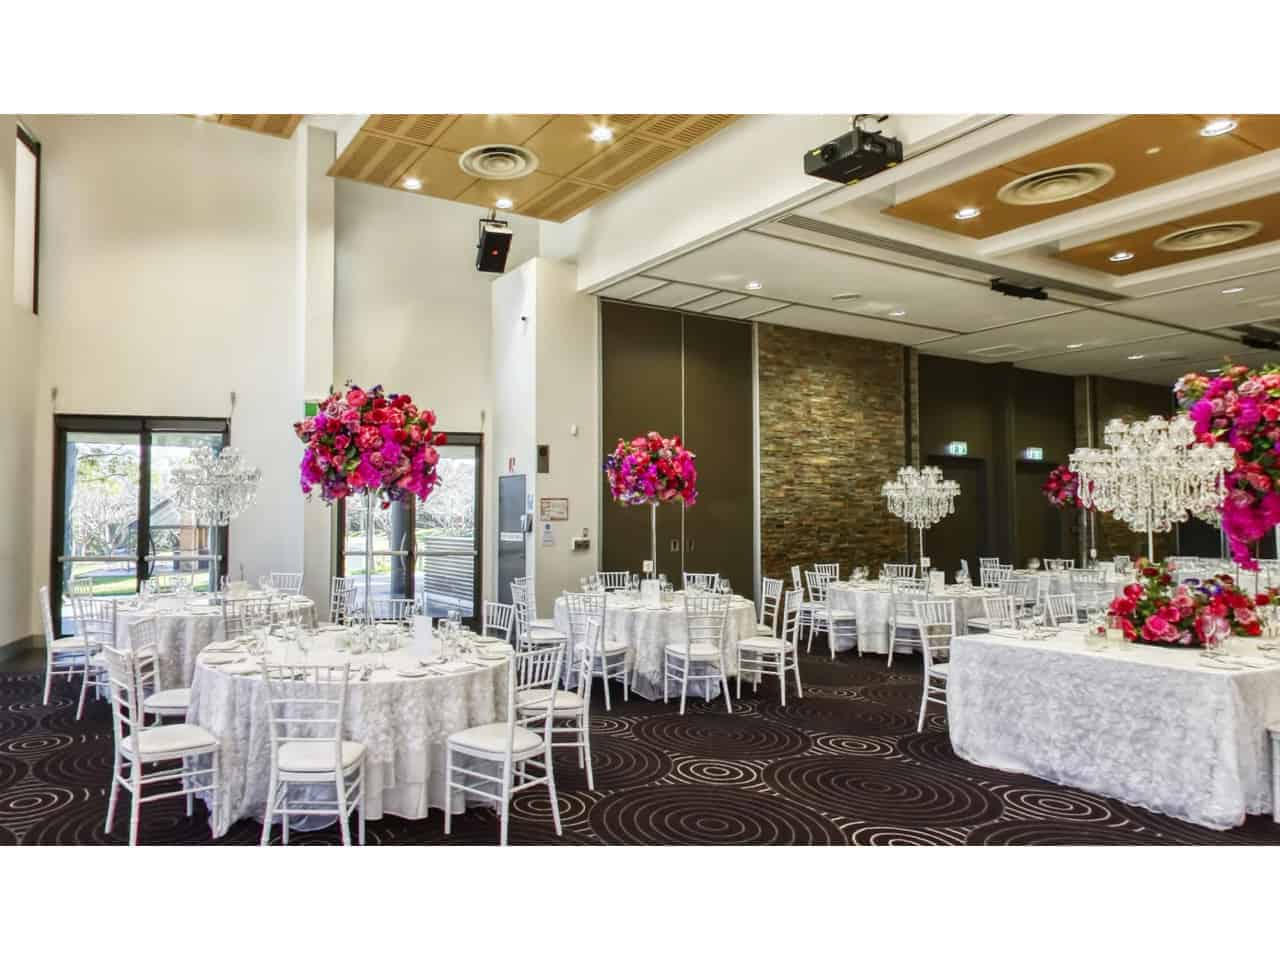 Sydney private function room